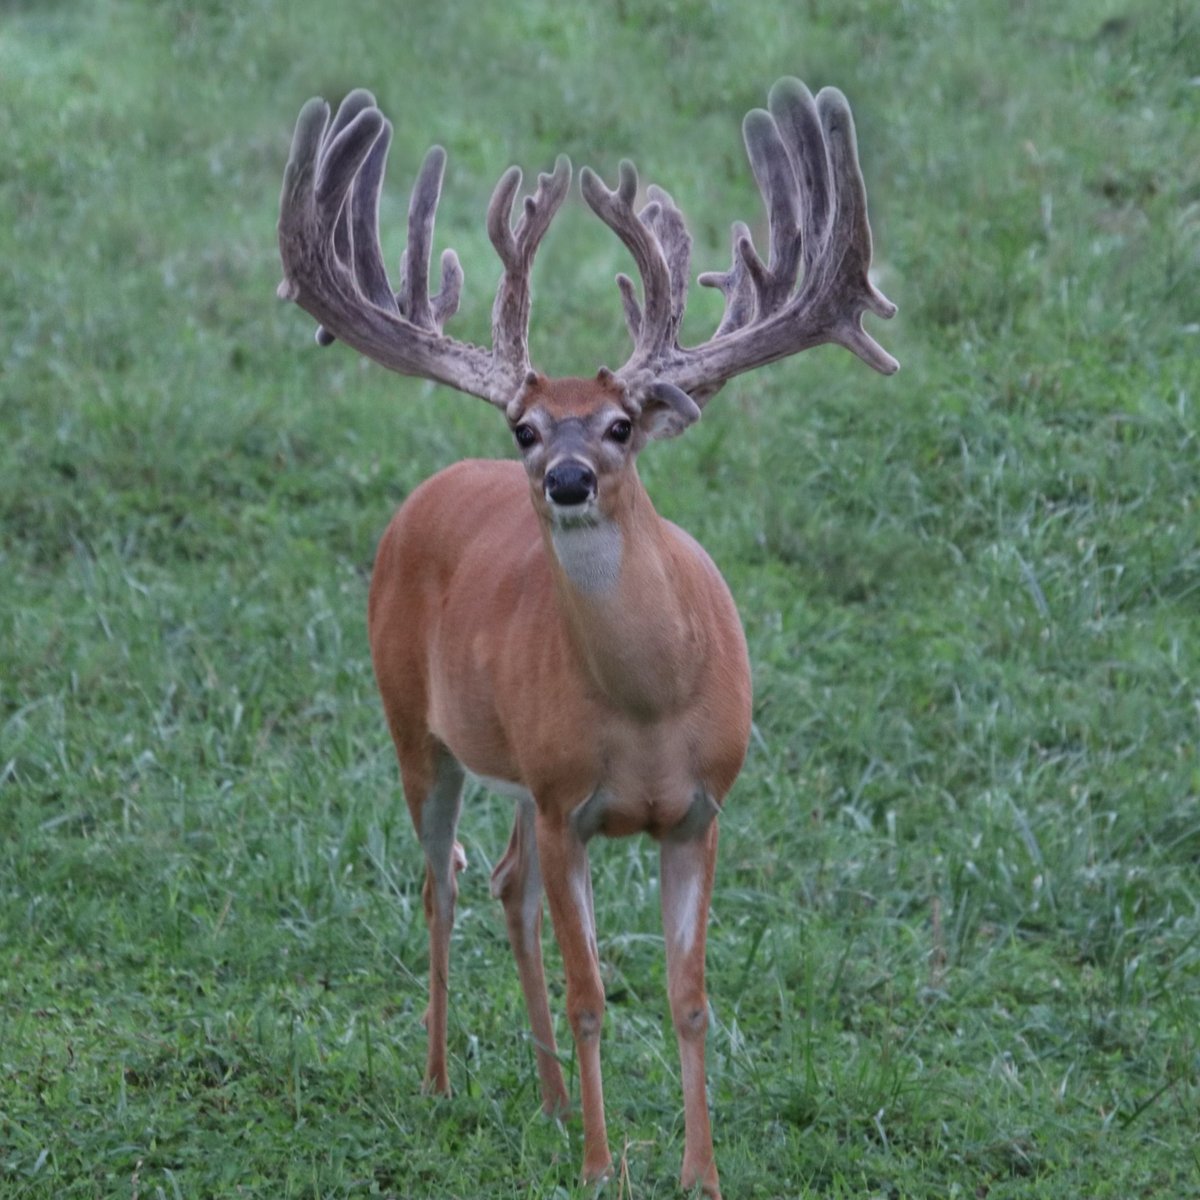 Are you going to be the first to hunt Oak Creek this season? Only a couple of spots left for the 2023 August Velvet Hunt. Call today for information! 573-943-6644 #takeakidhunting #oakcreekgiants #bestdeerhunts #missourideerhunting #oakcreekwhitetailranch